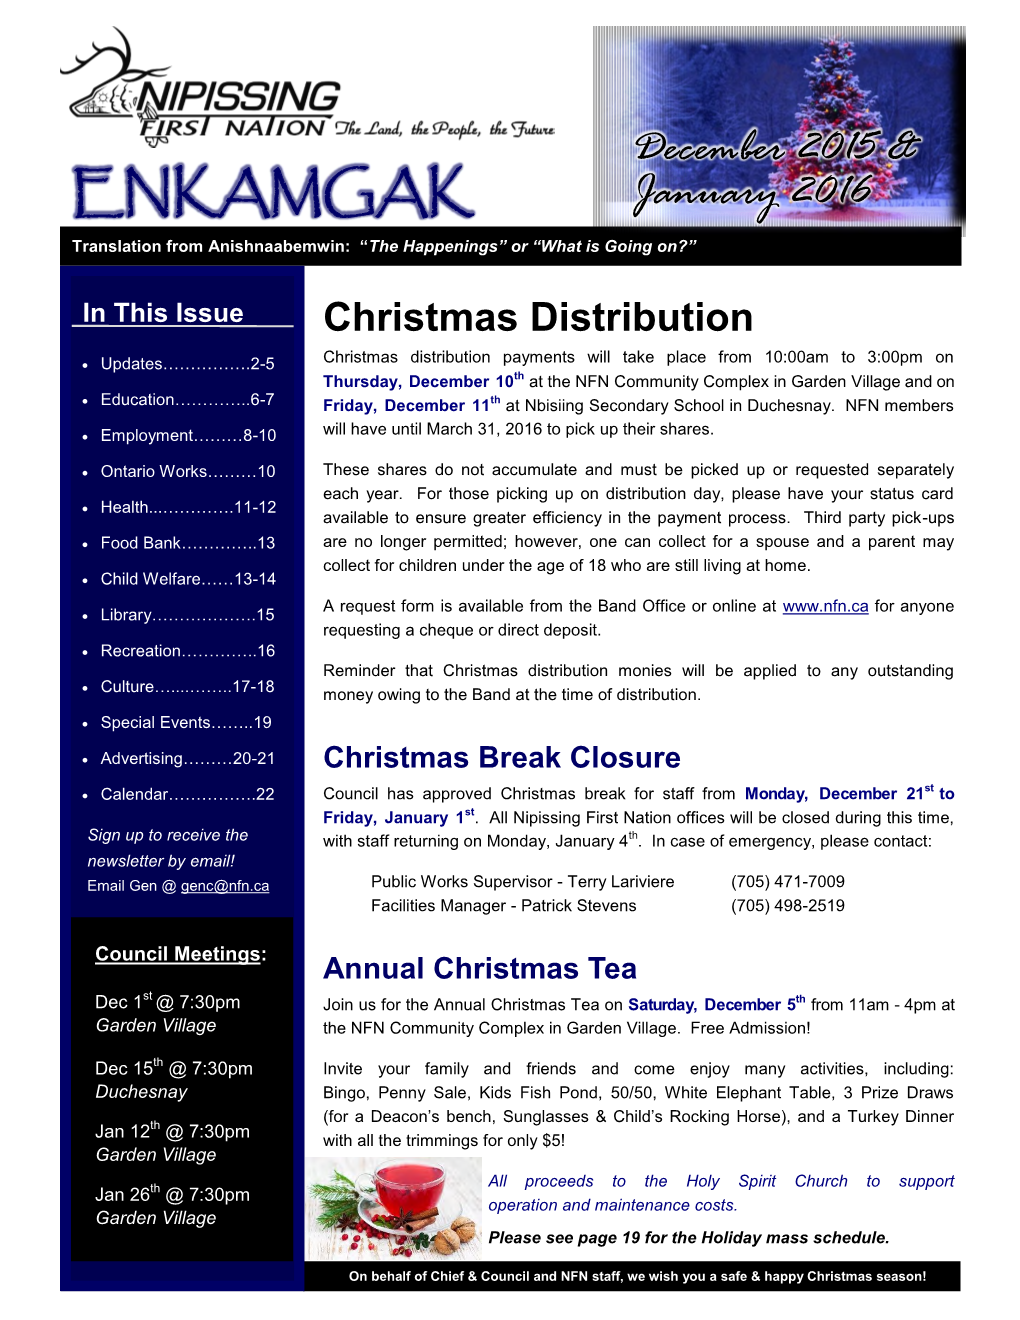 ENKAMGAK January 2016 Translation from Anishnaabemwin: “The Happenings” Or “What Is Going On?”